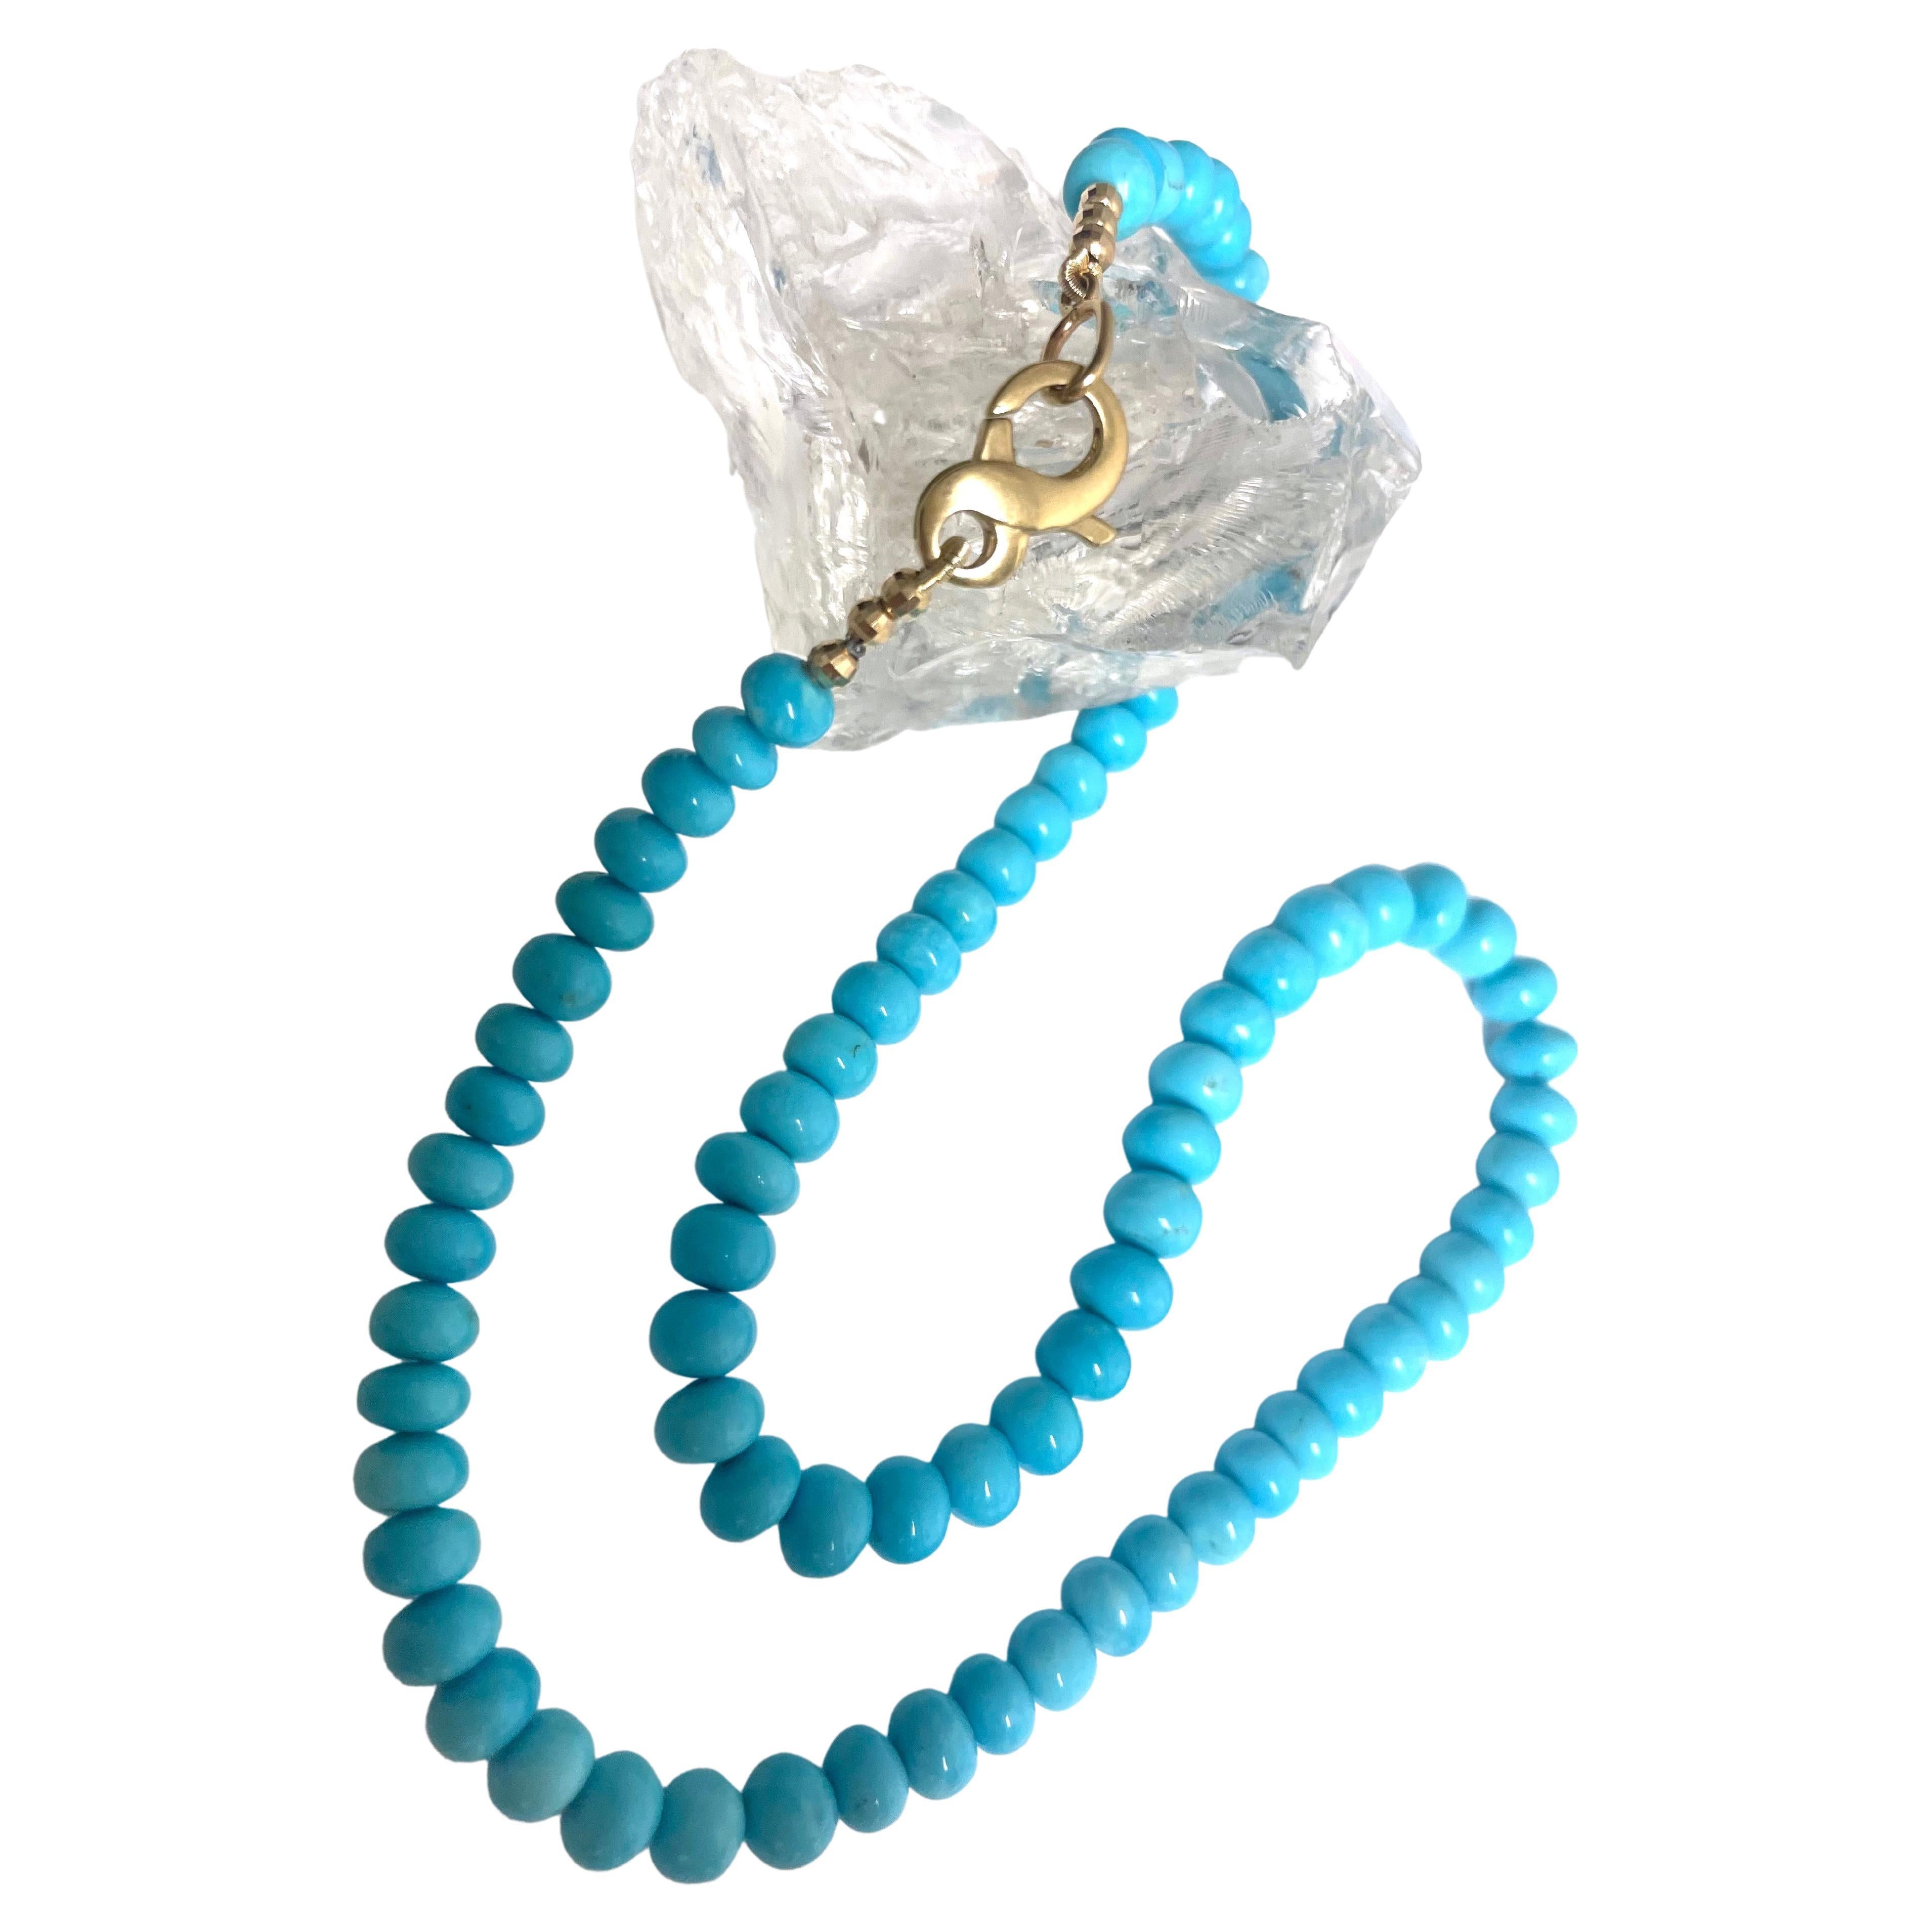 Description
Vivid Sleeping Beauty Turquoise 135 carats 6 to 8mm graduated strand of clean, perfect stones, 14k yellow gold. 
Item # N3869
Pair it with matching earrings (Item# E3400), and matching bracelet (Item# B1341). See photos, all sold